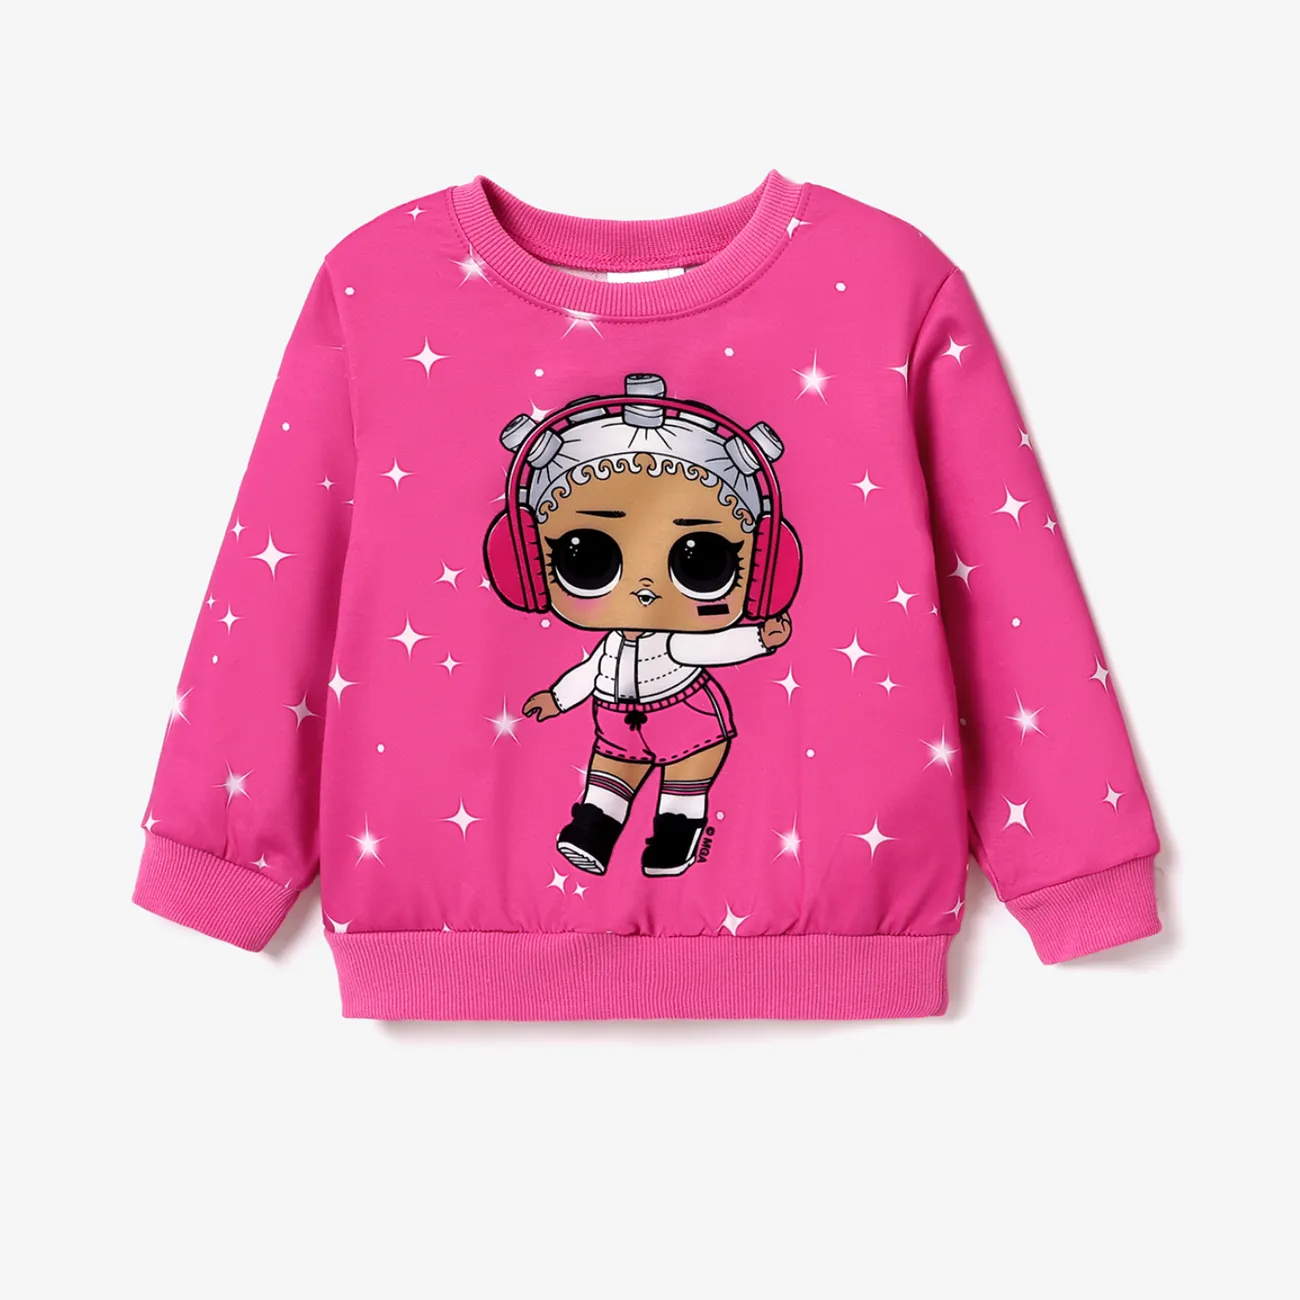 L.O.L. SURPRISE! Toddler Girl Character Print Long-sleeve Top or Bell Pant Pink big image 1